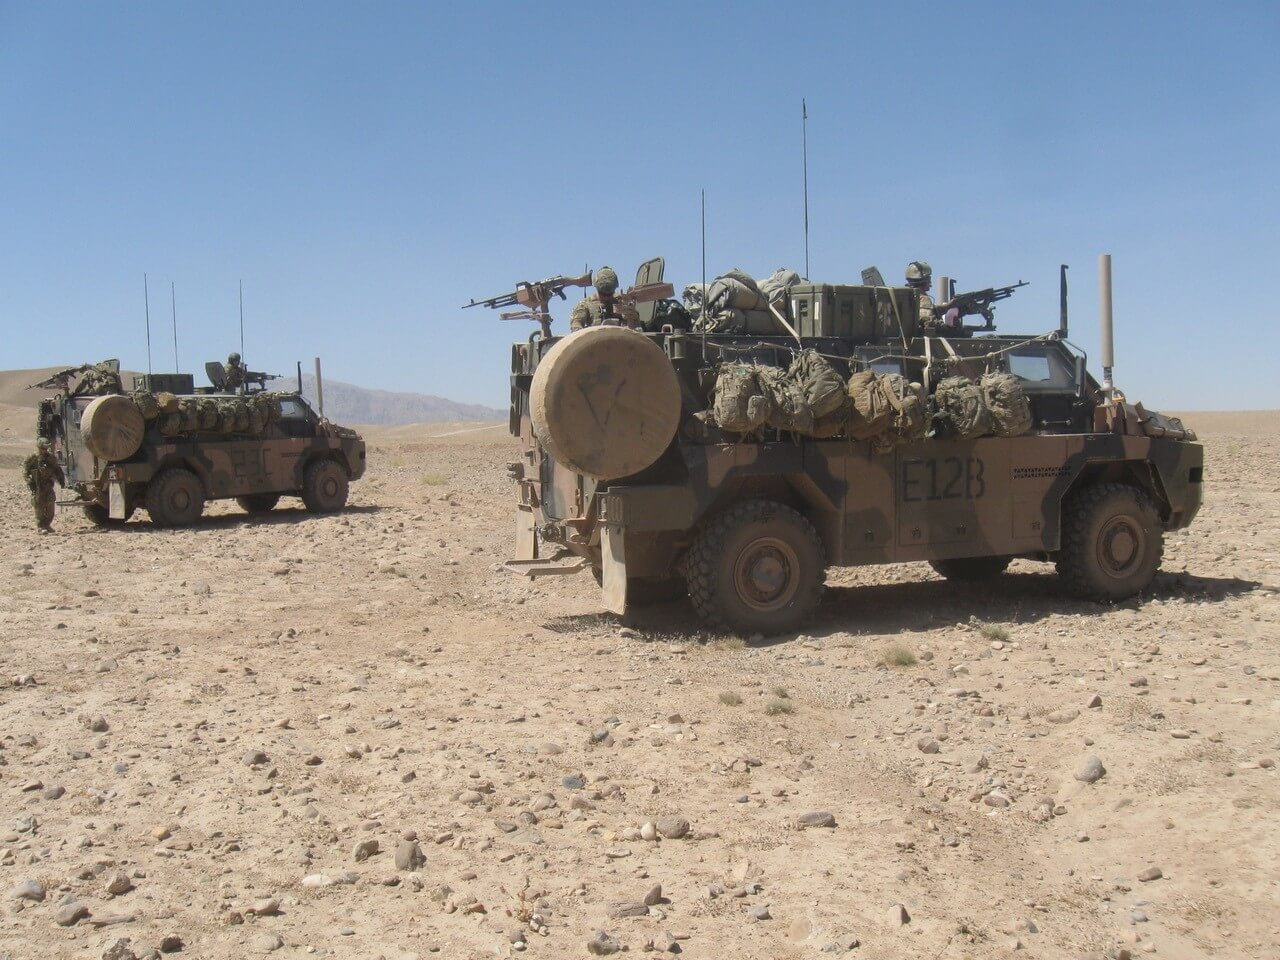 PMV from 5 Section, 2 Troop during a 107mm Rocket point of origin exploitation in Afghanistan, 2013.